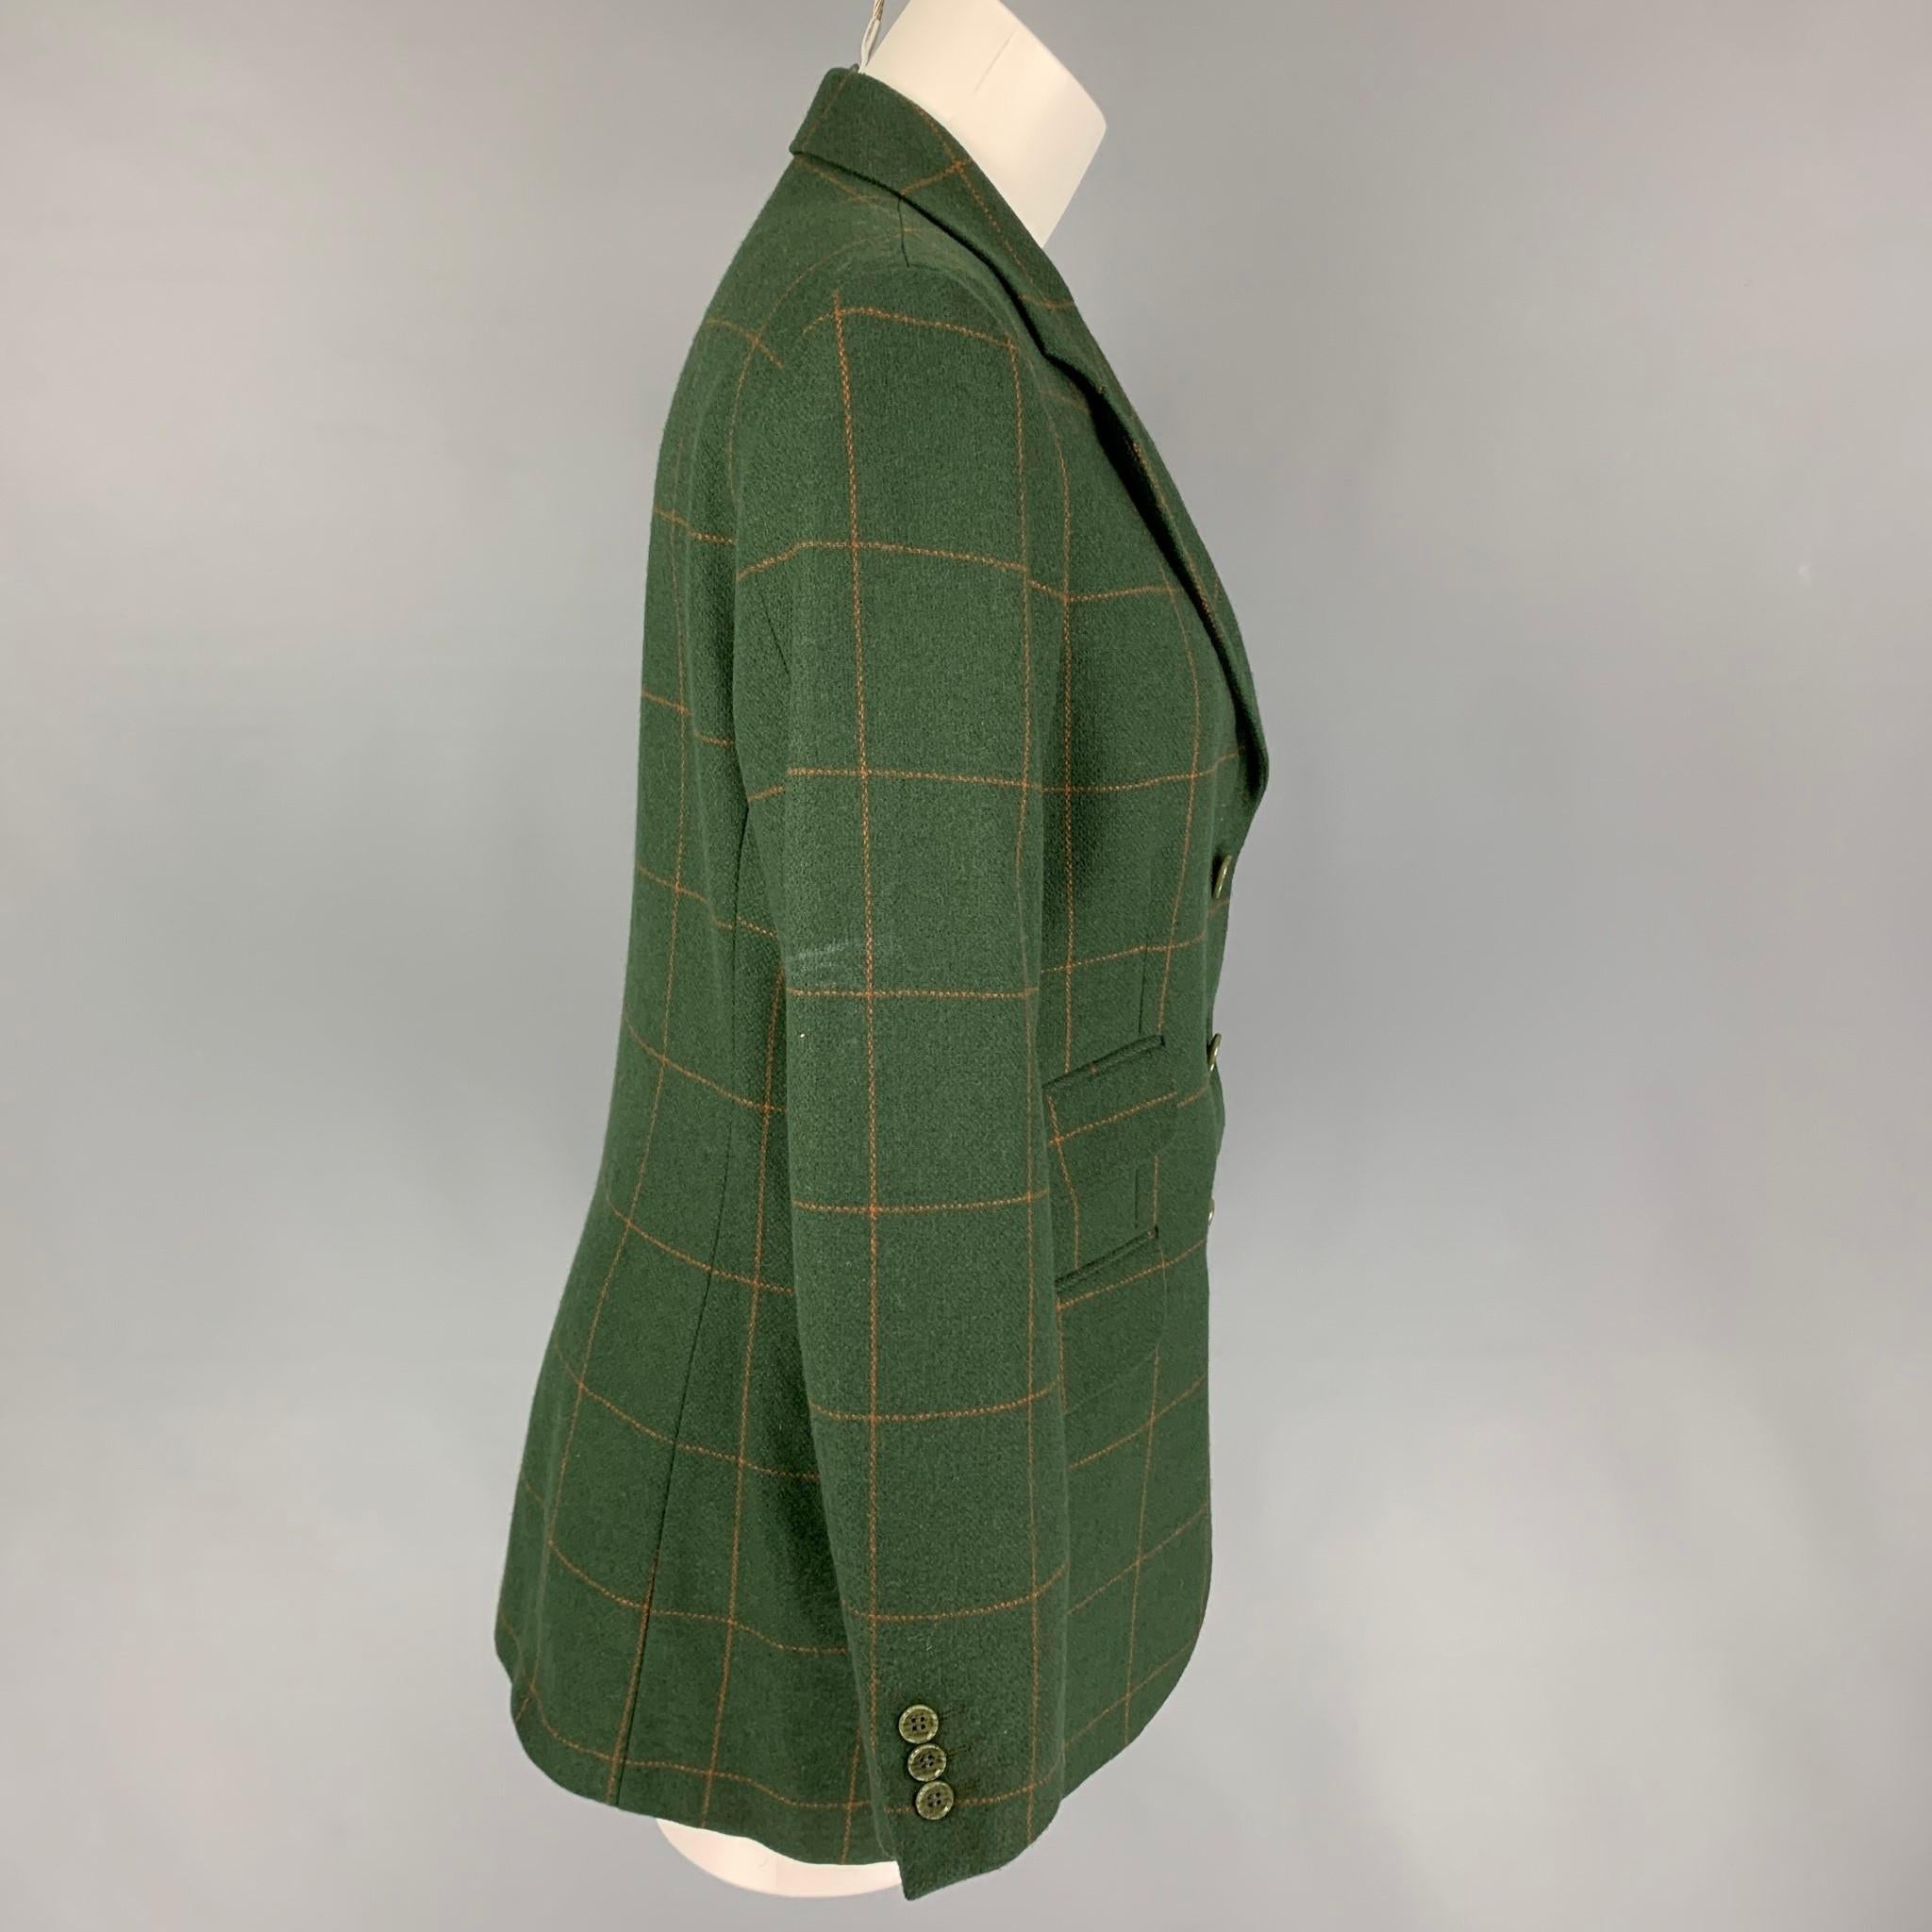 CHEAP and CHIC by MOSCHINO blazer comes in a breen & orange windowpane wool with a full liner featuring a notch lapel, flap pockets, single back vent, and a three button closure. Made in Italy.

Very Good Pre-Owned Condition.
Marked: I 44 / D 40   